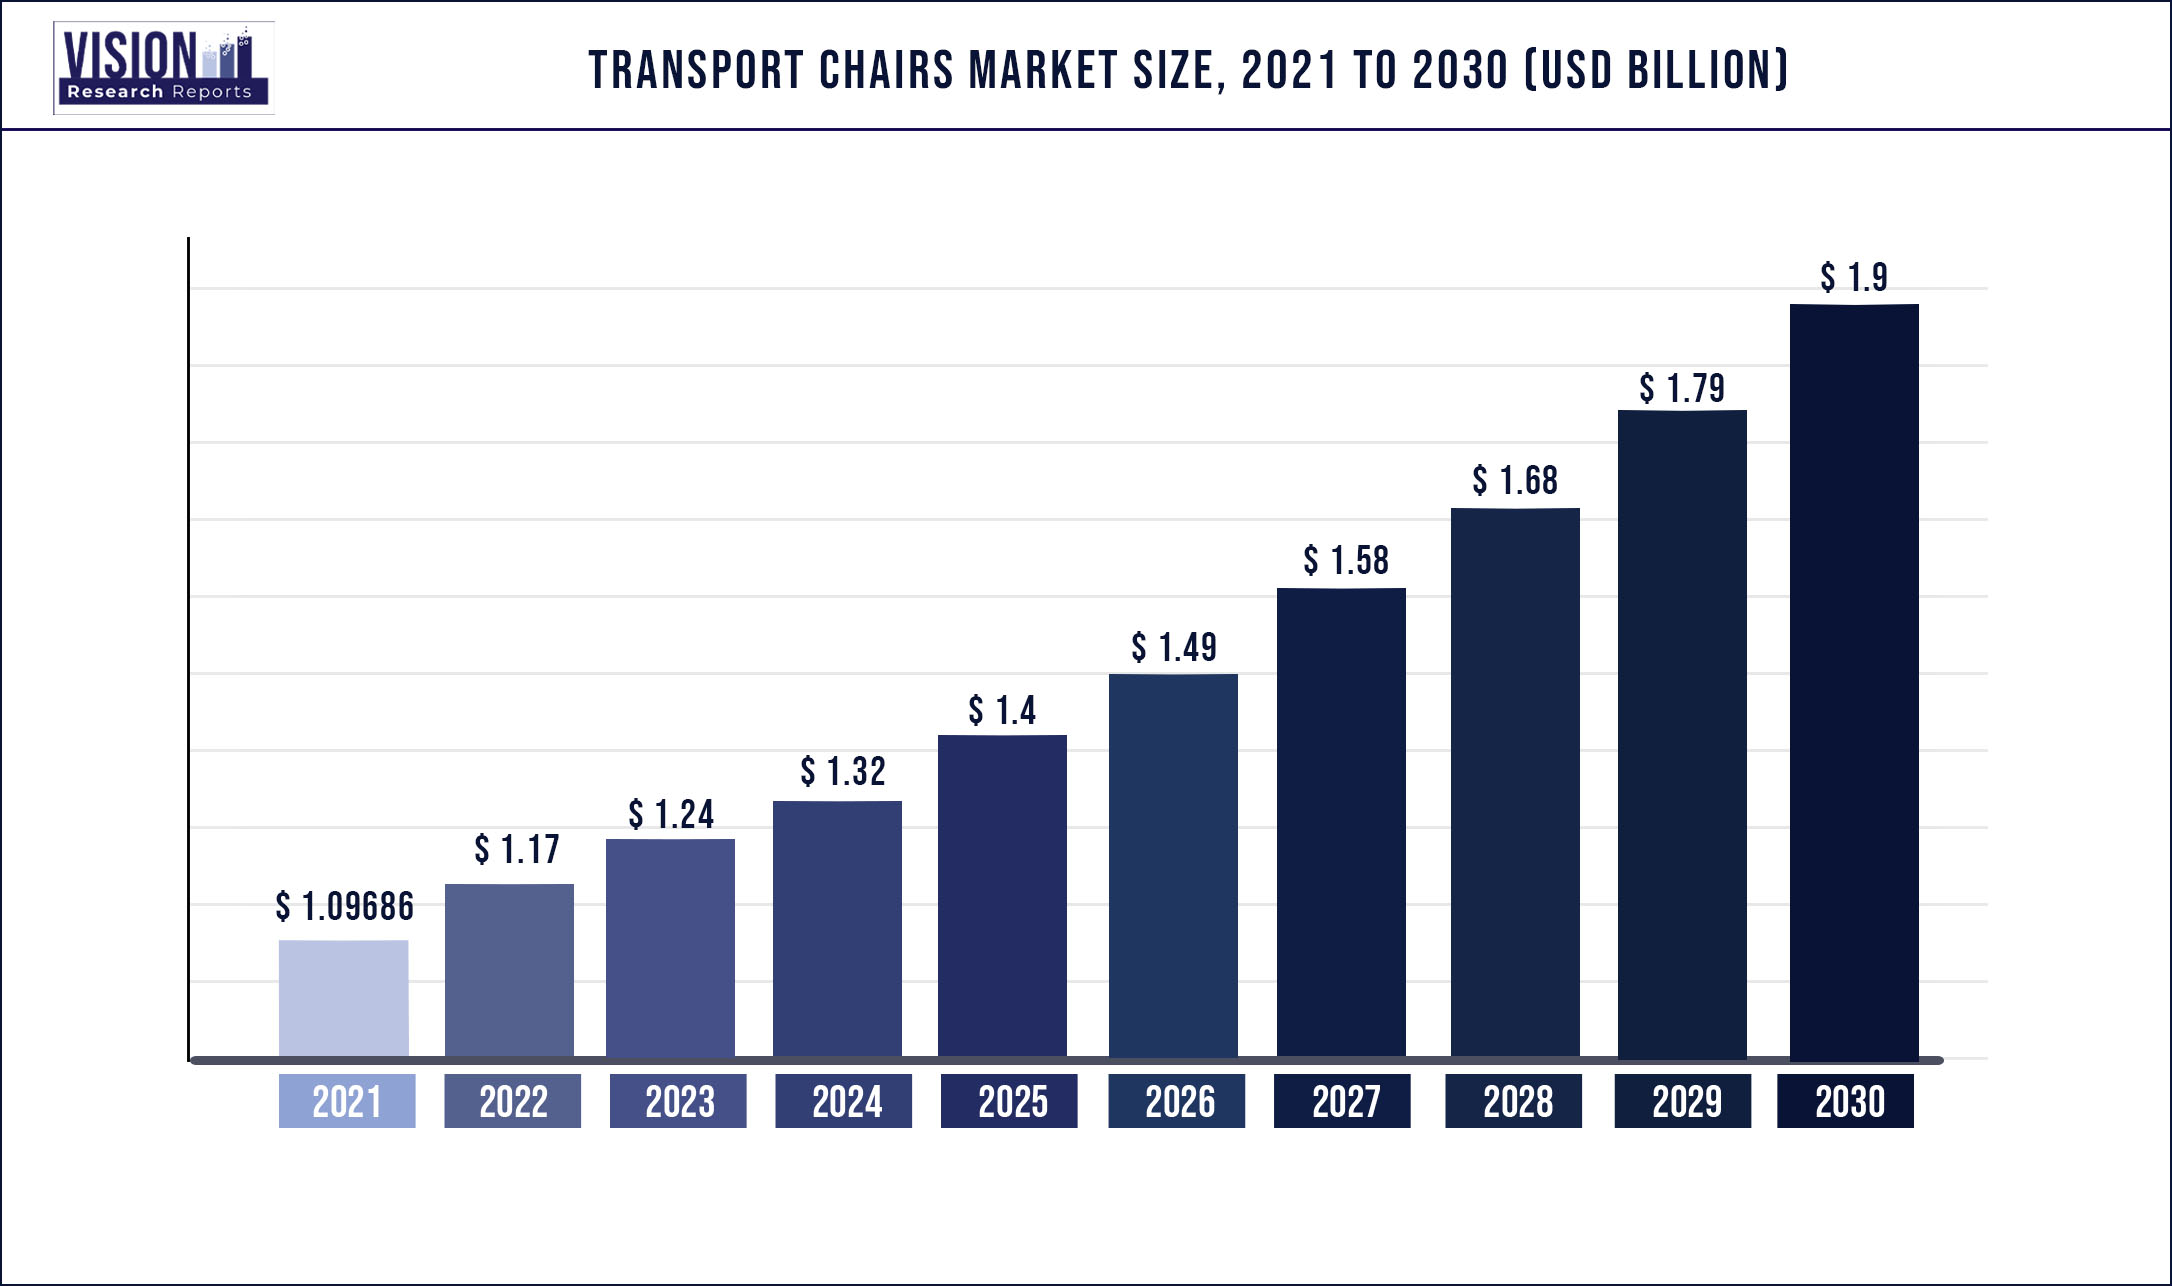 Transport Chairs Market Size 2021 to 2030